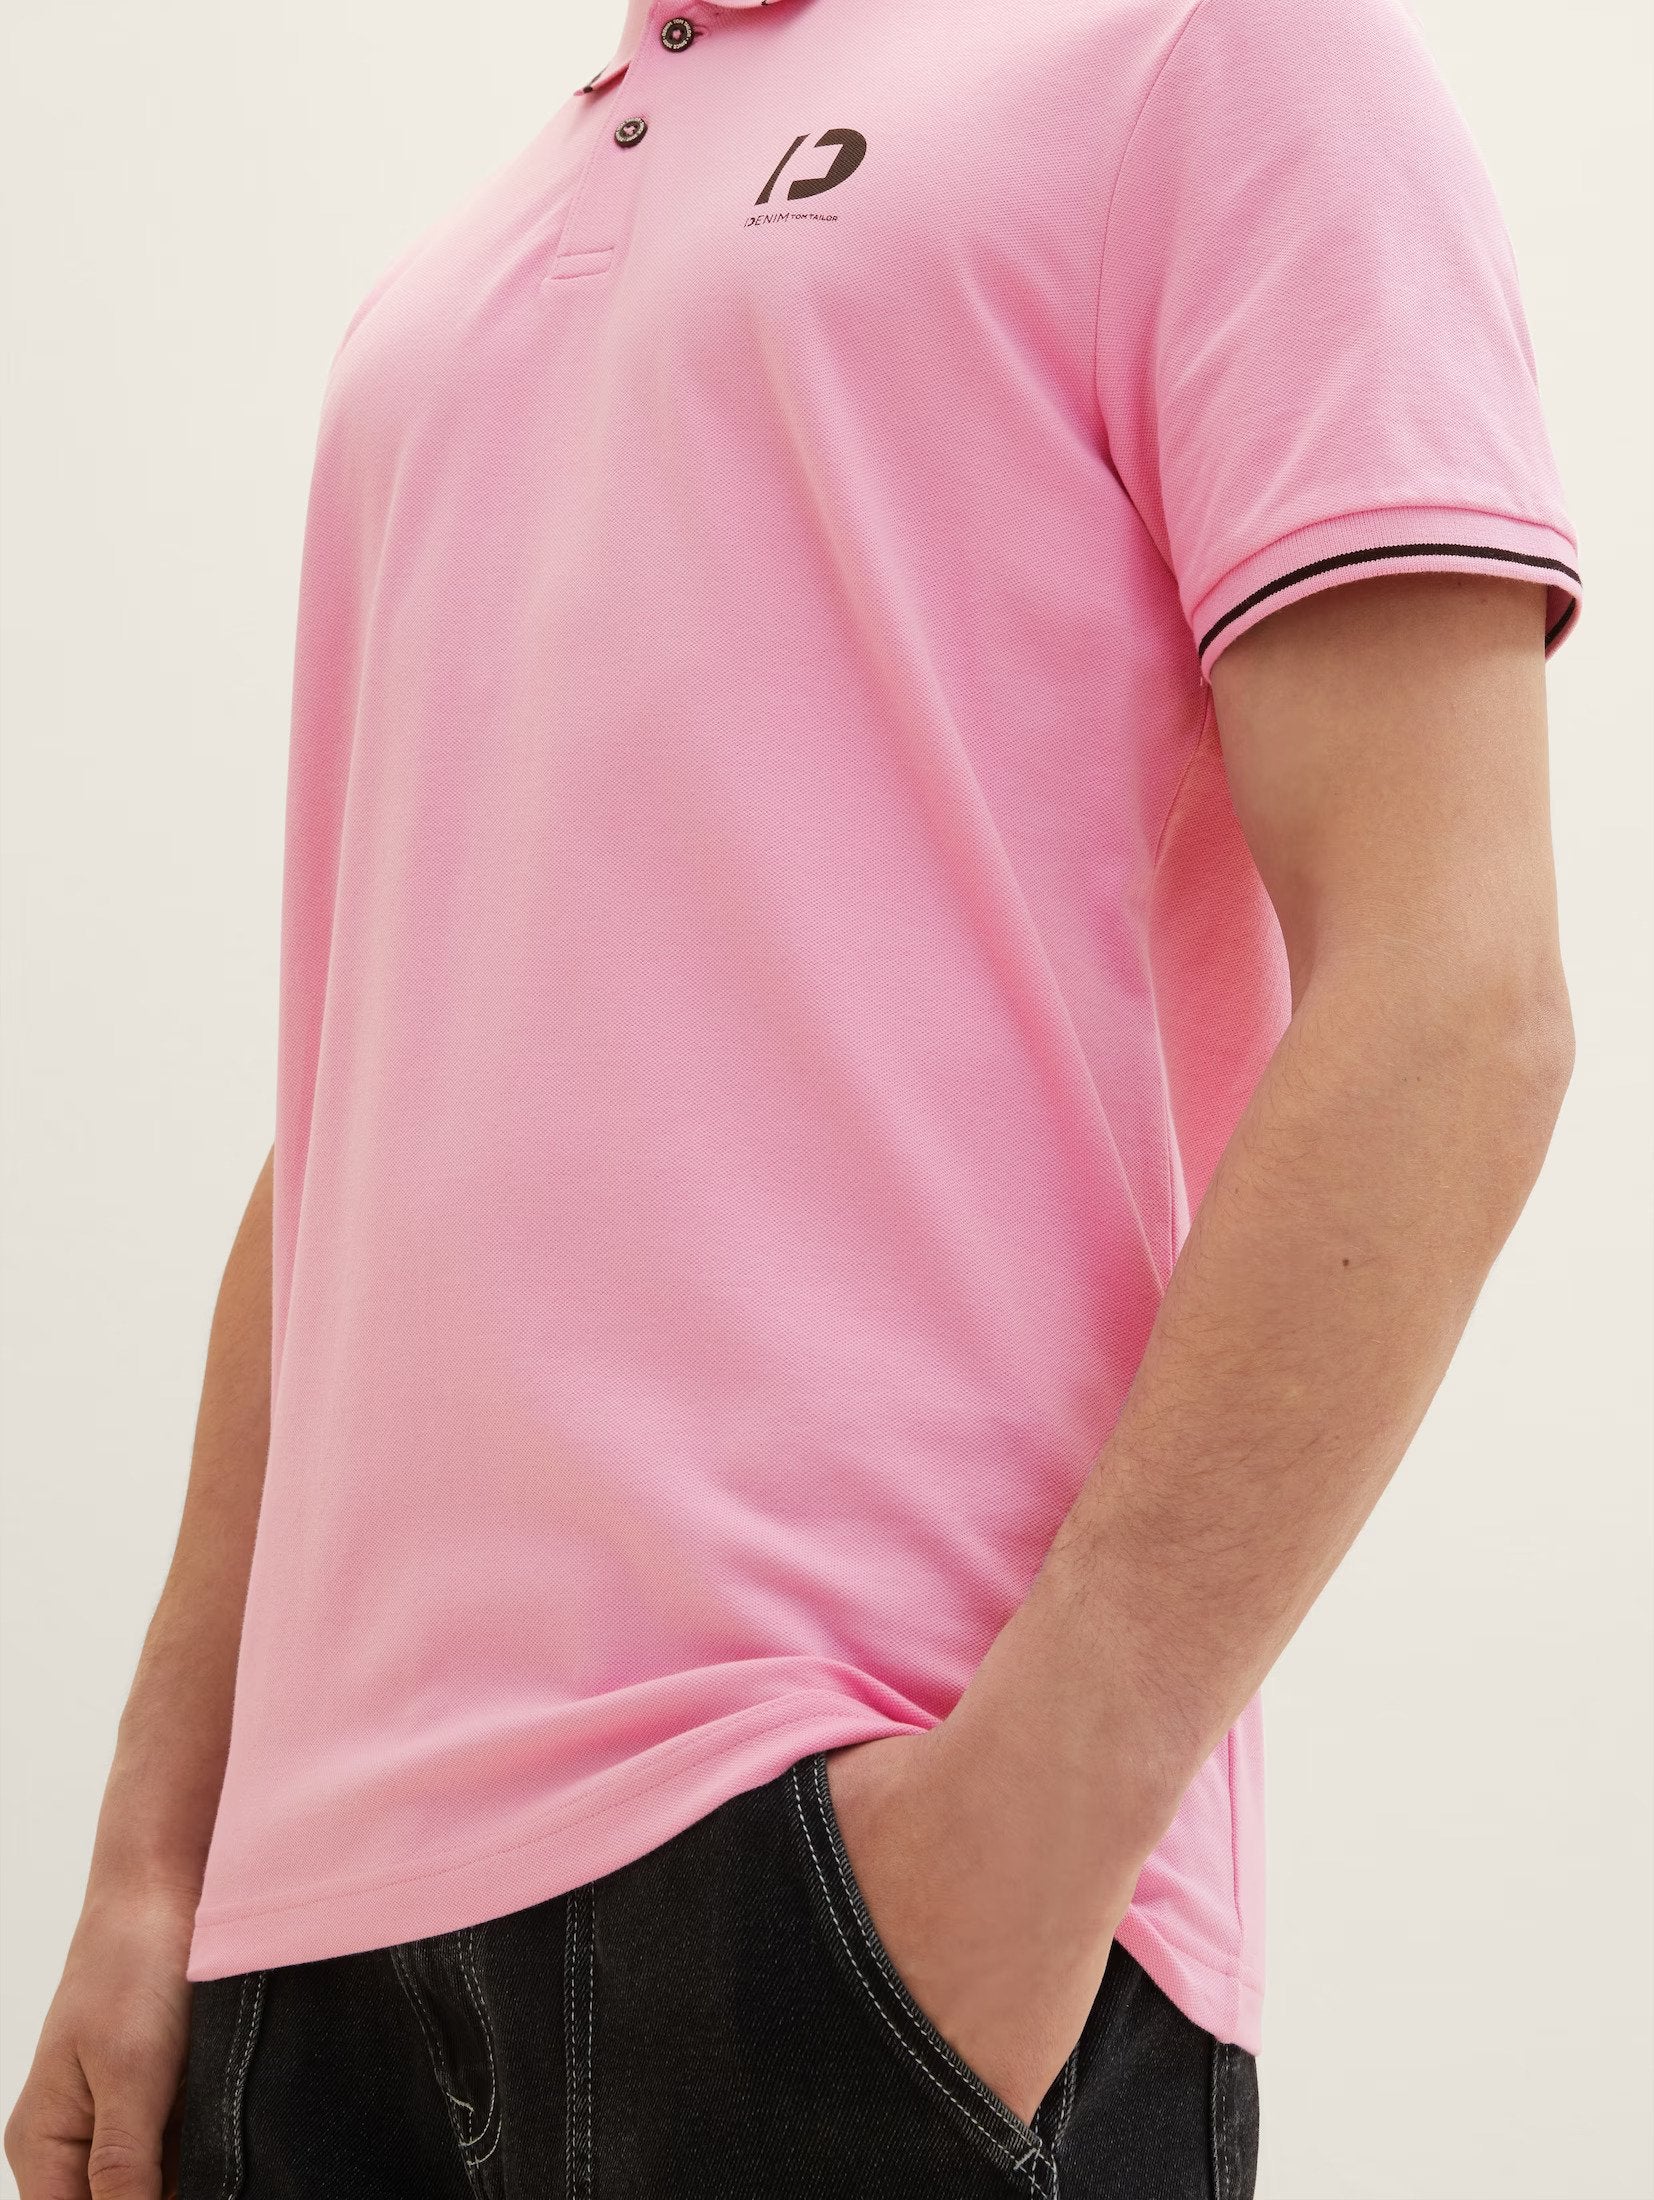 Tom Tailor Pink Designed Polo With Chest Logo